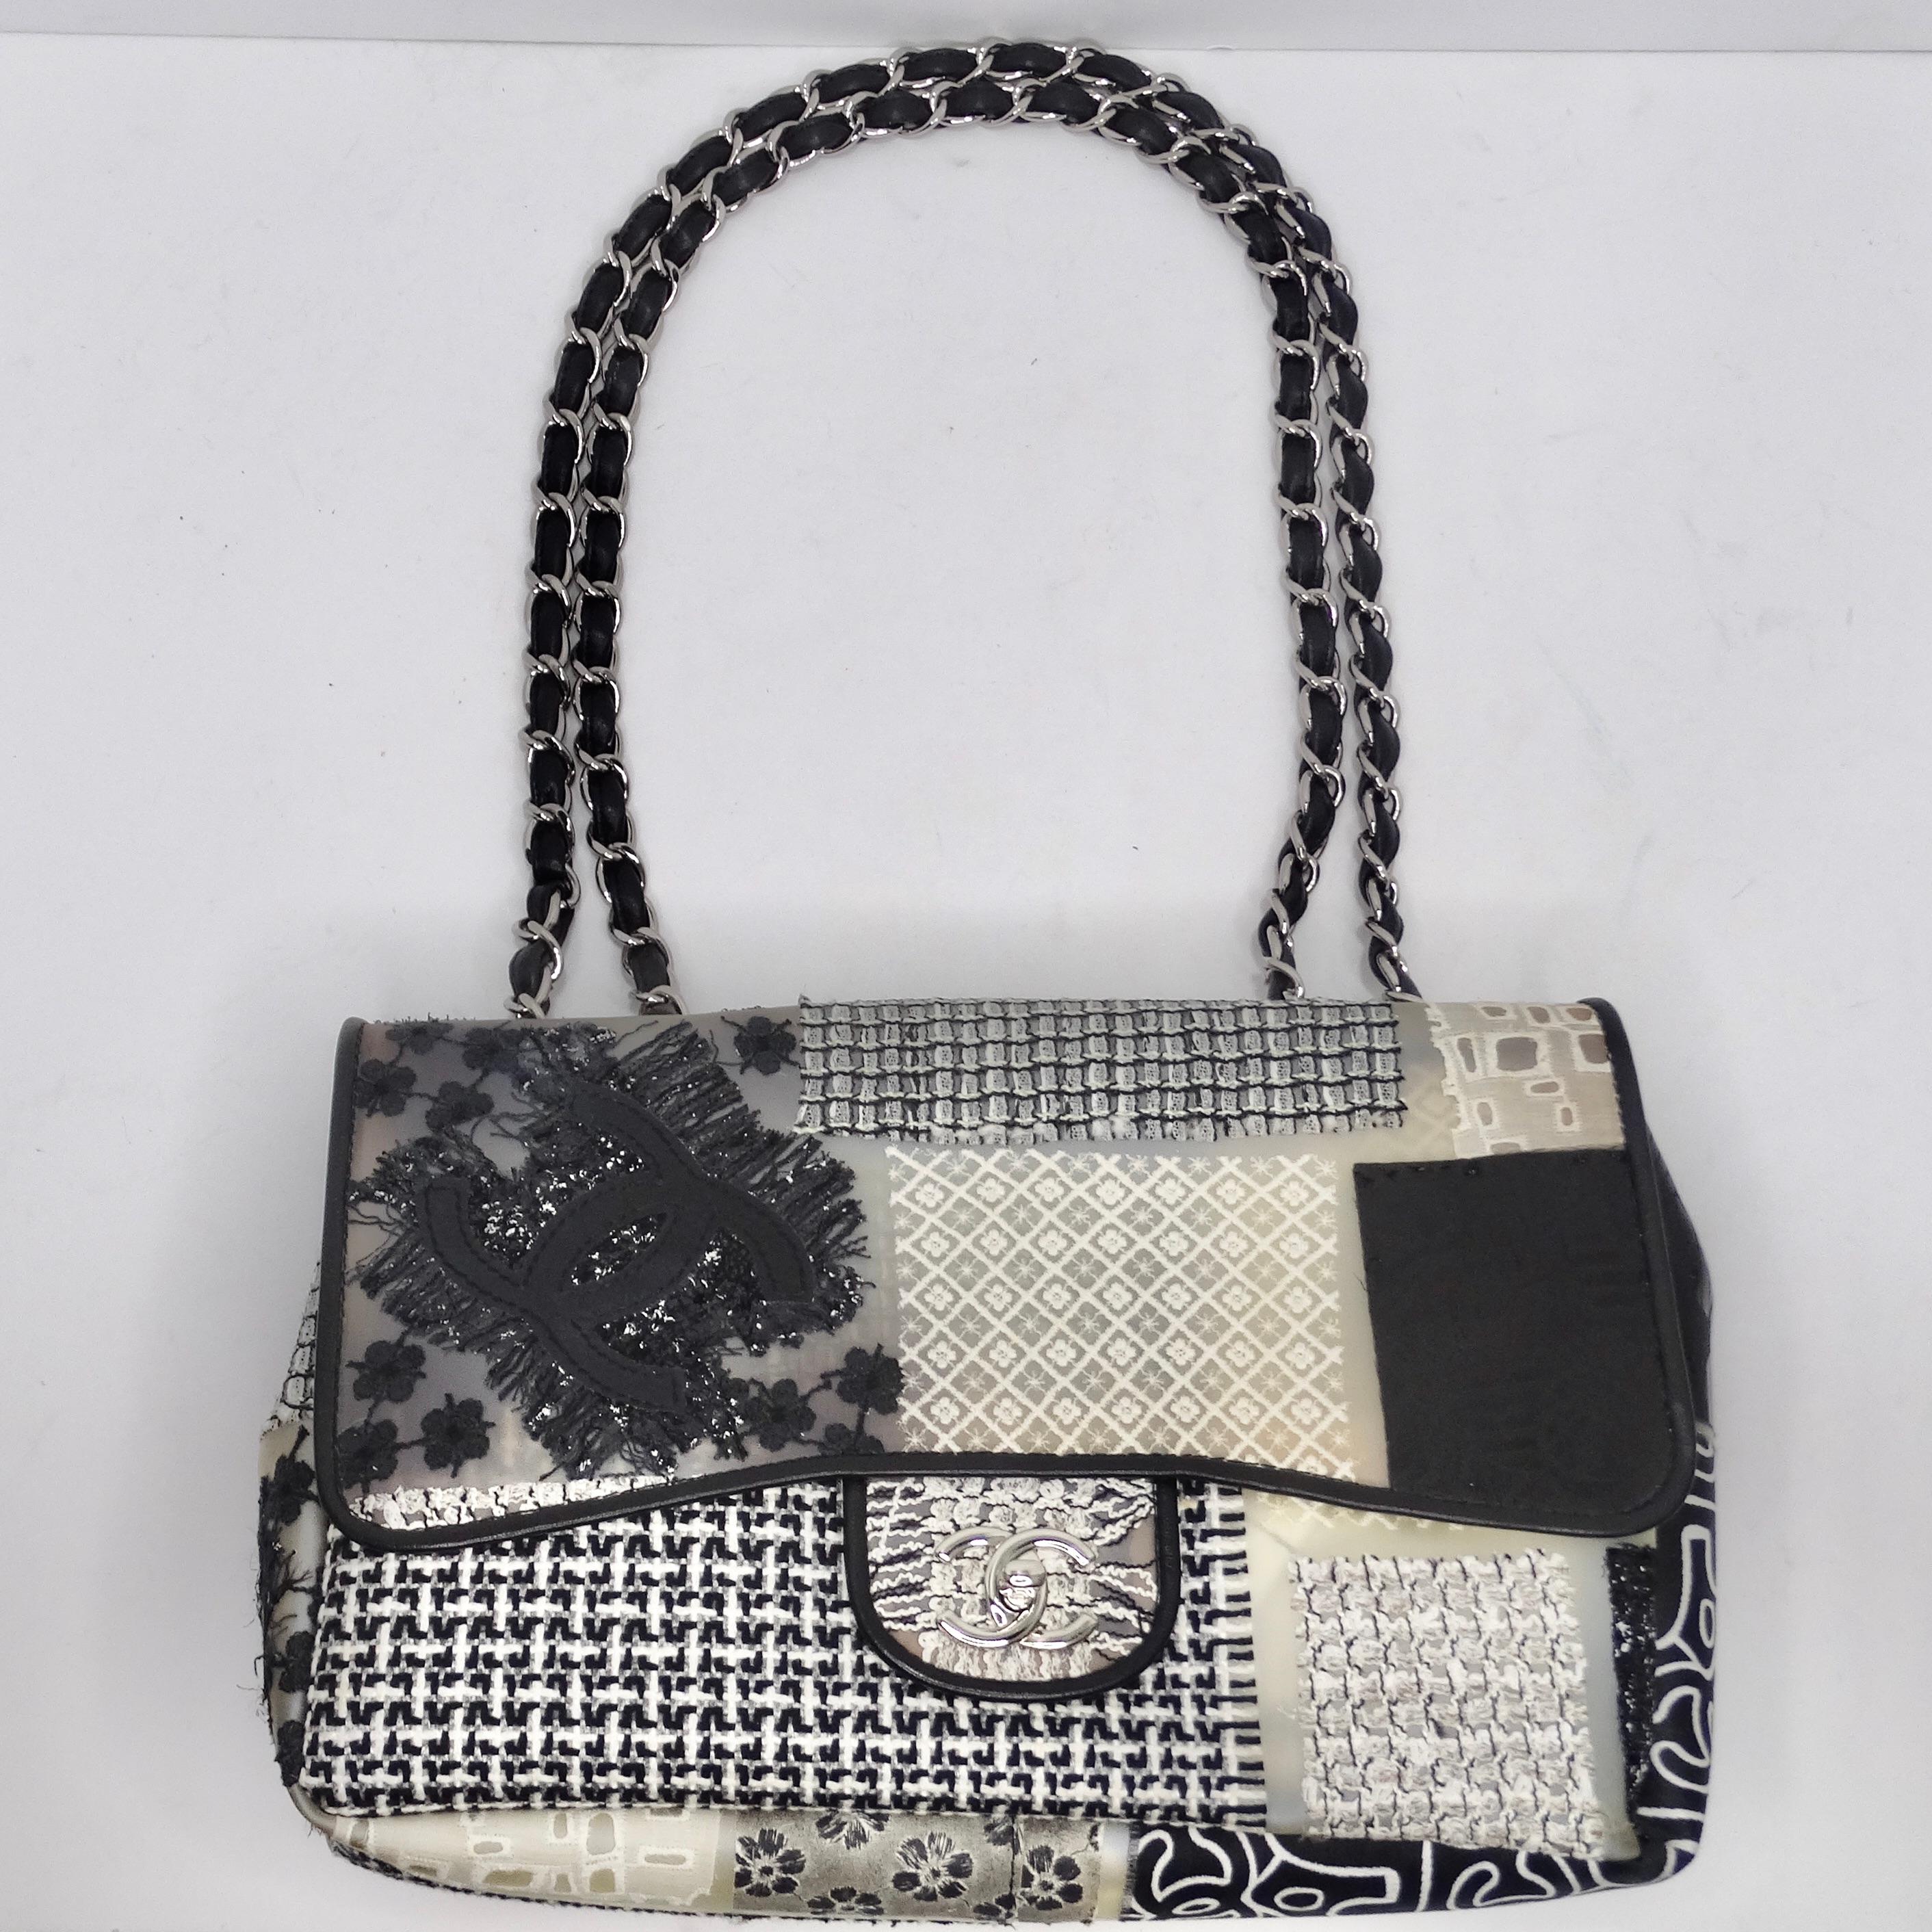 Elevate Your Wardrobe with the uniquely chic Chanel Patchwork Tweed PVC Classic Single Flap Handbag! Introducing a one-of-a-kind Chanel creation that is bound to turn heads wherever you go. This Chanel Patchwork Tweed PVC Classic Single Flap Handbag